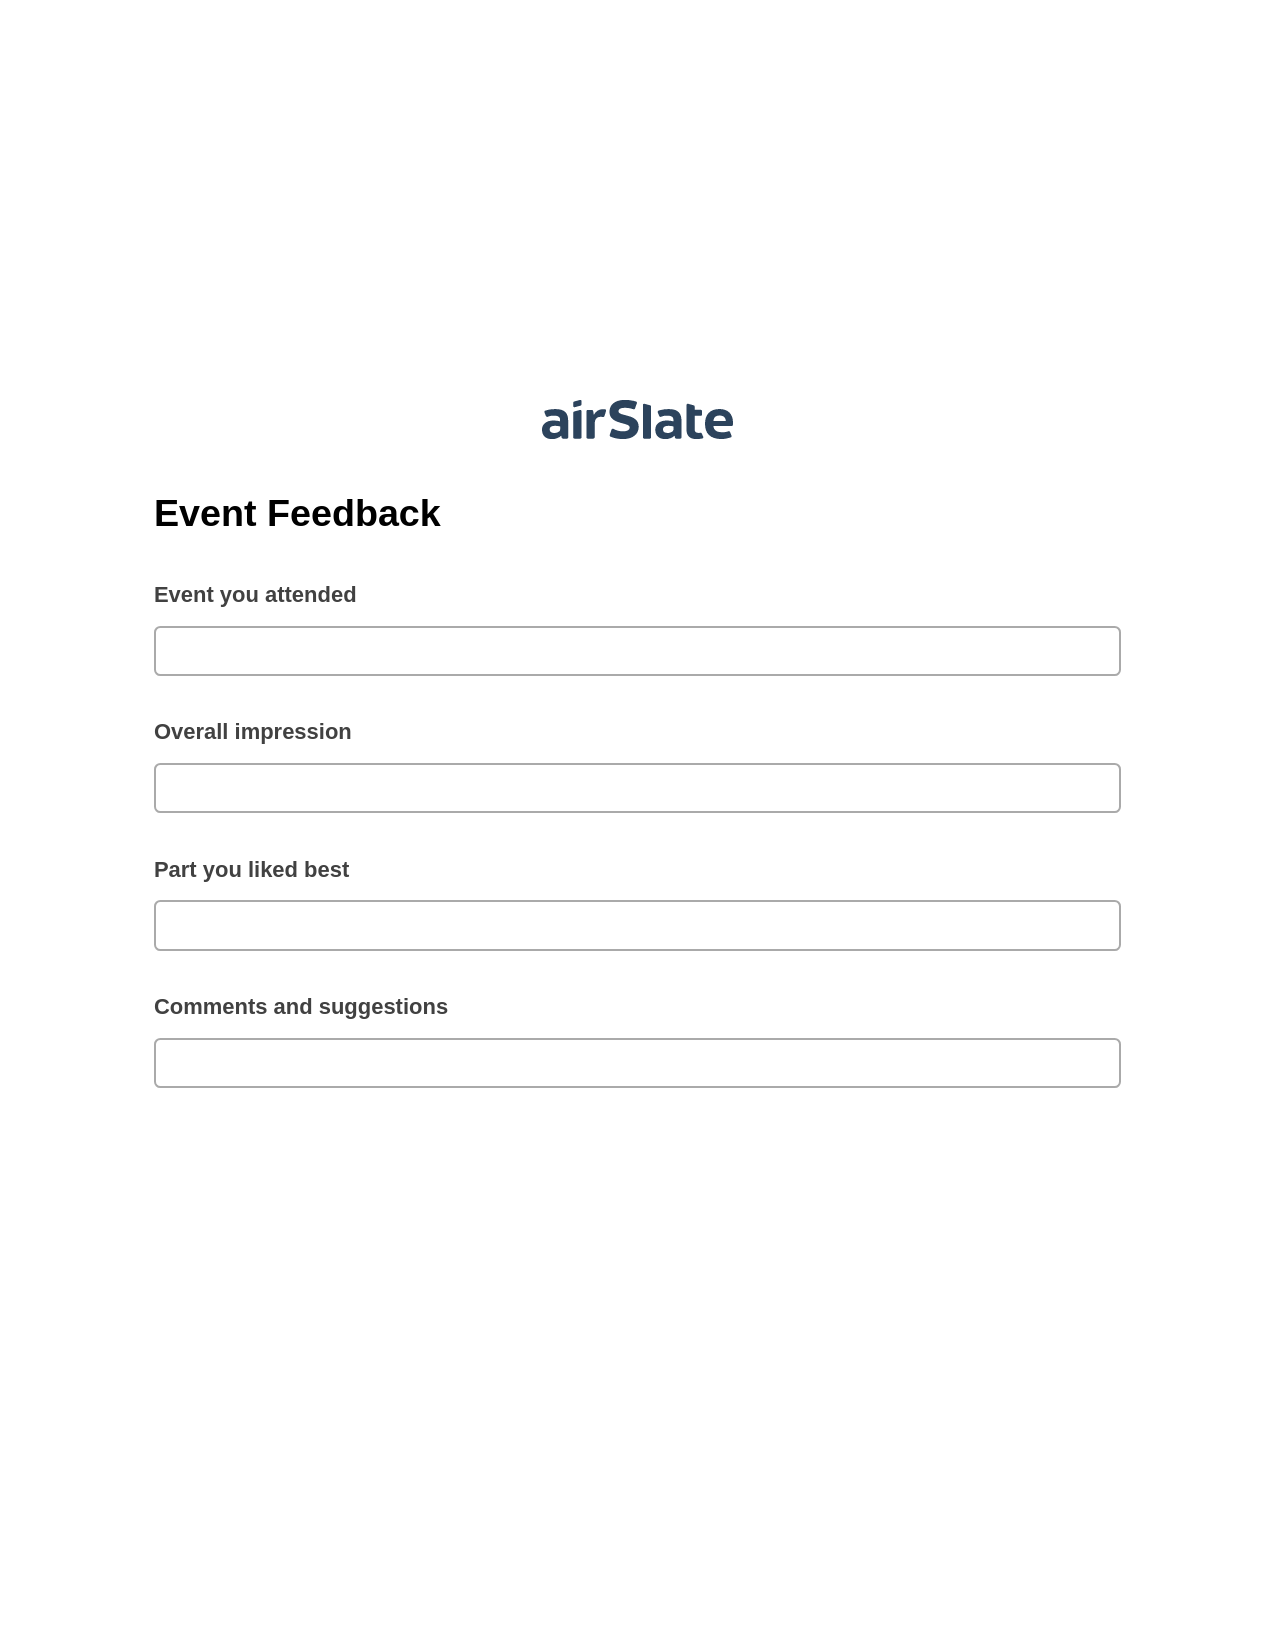 Event Feedback Pre-fill from CSV File Bot, Audit Trail Bot, Dropbox Bot